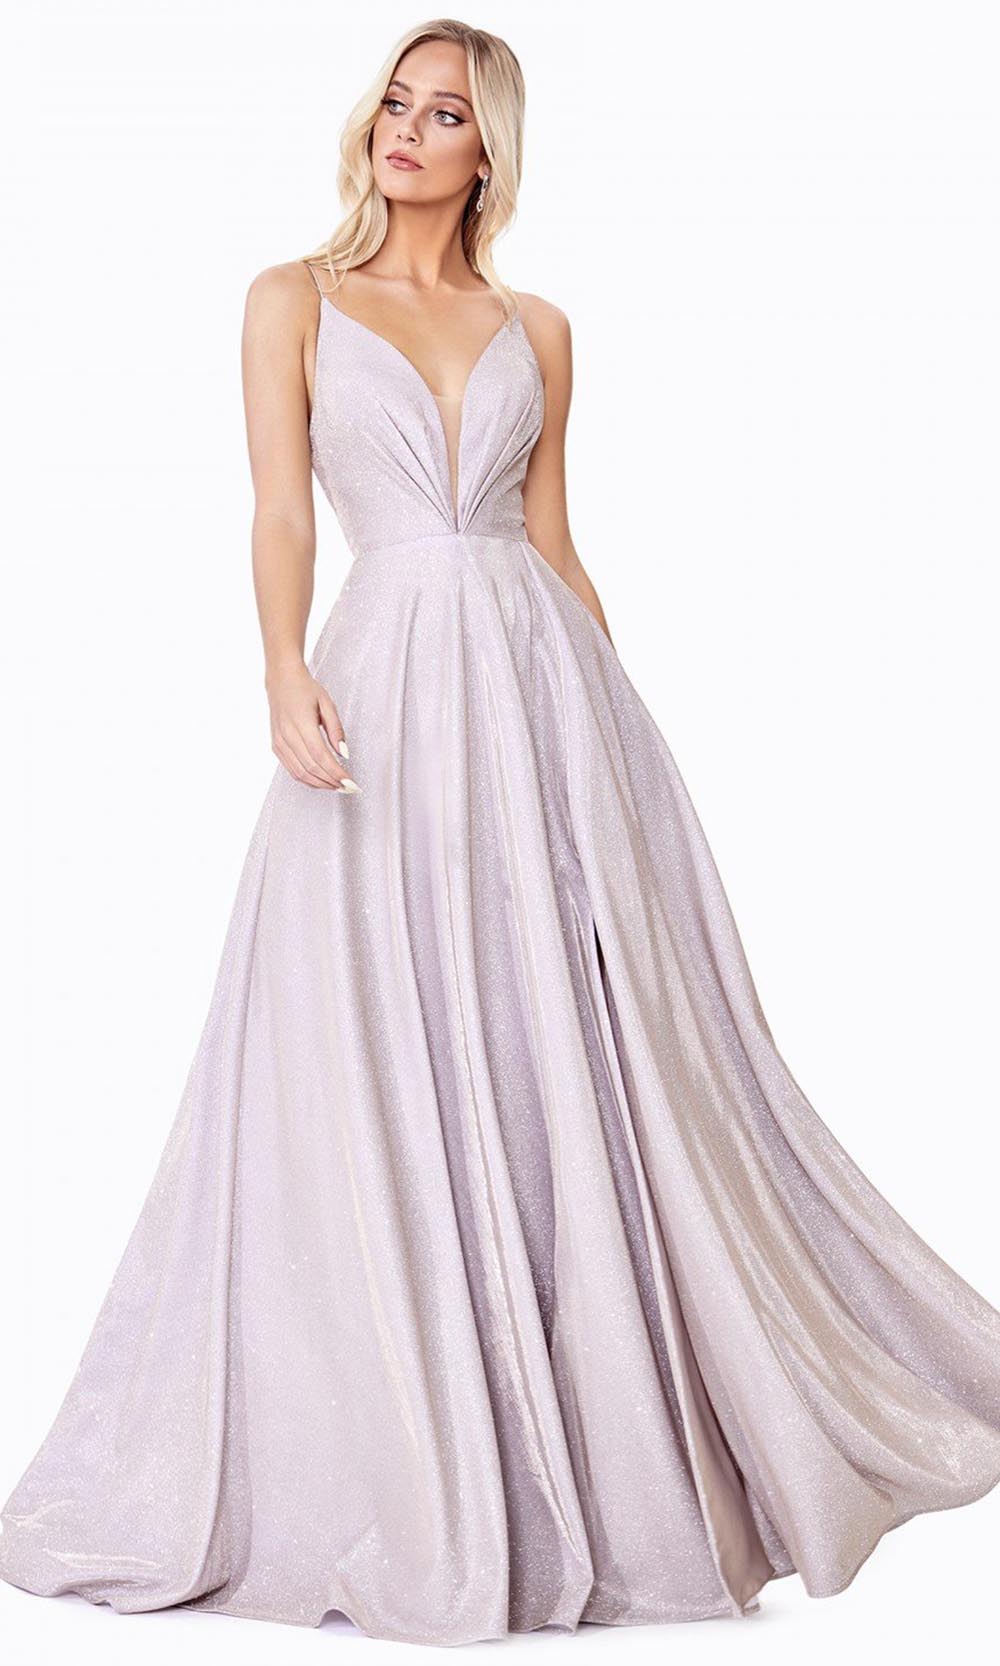 Ladivine - CD185 Deep V Neck A-Line Gown In Neutral